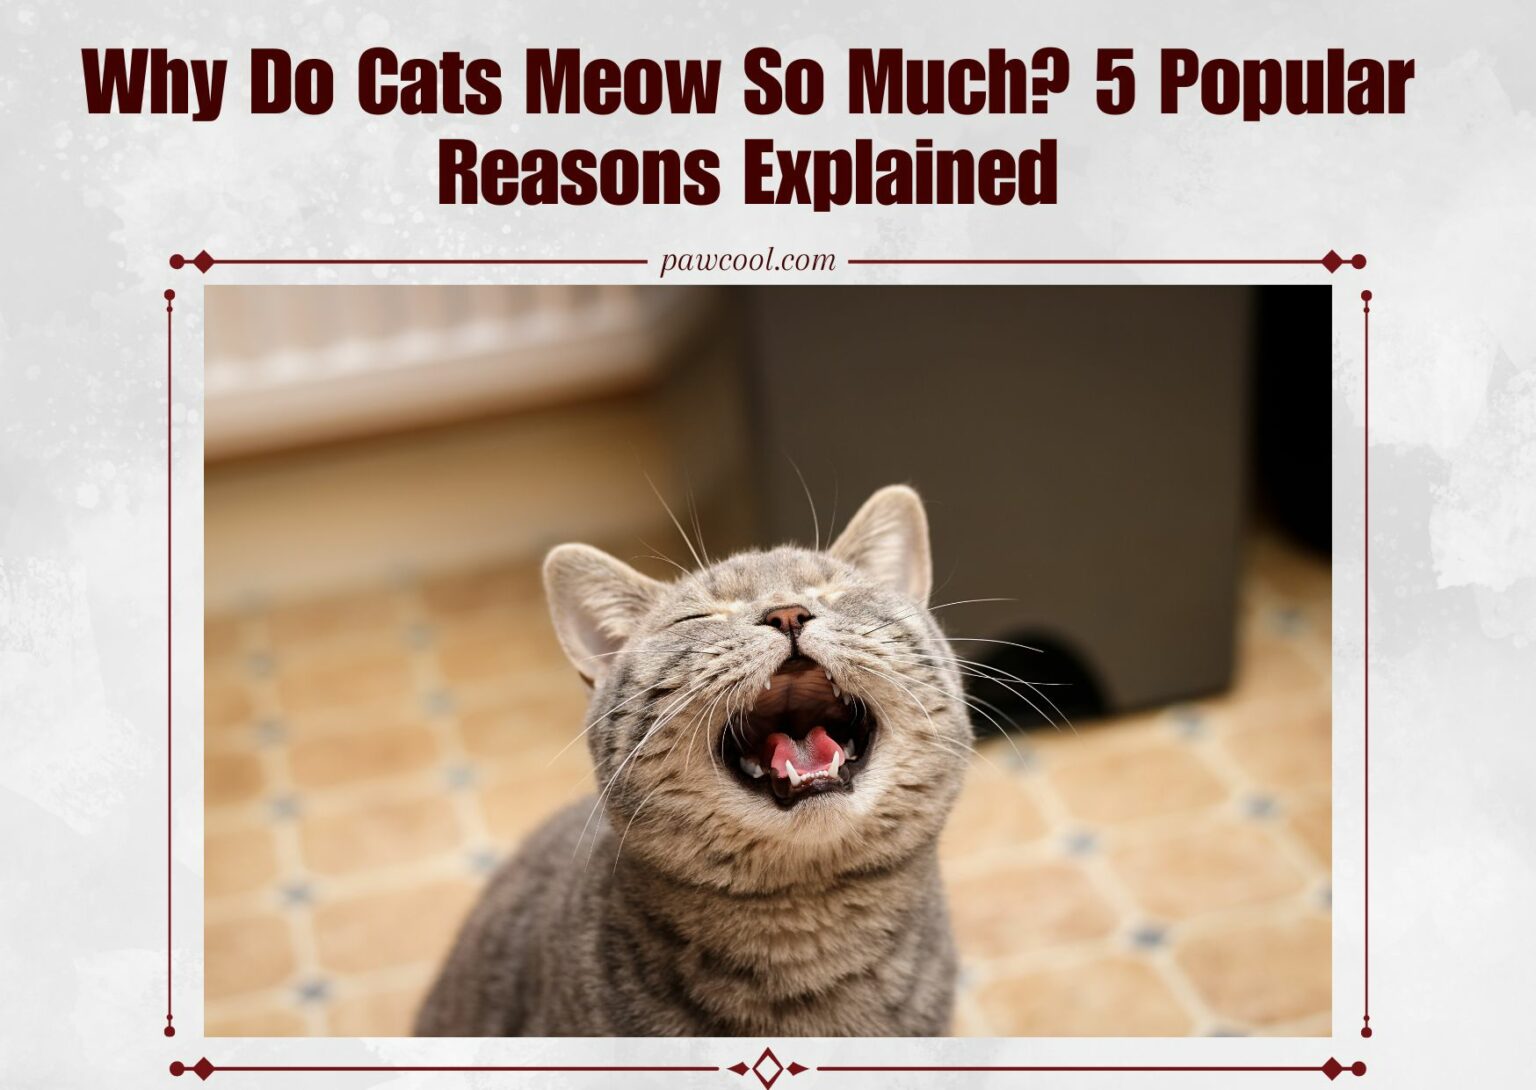 Why Do Cats Meow So Much? 5 Popular Reasons Explained